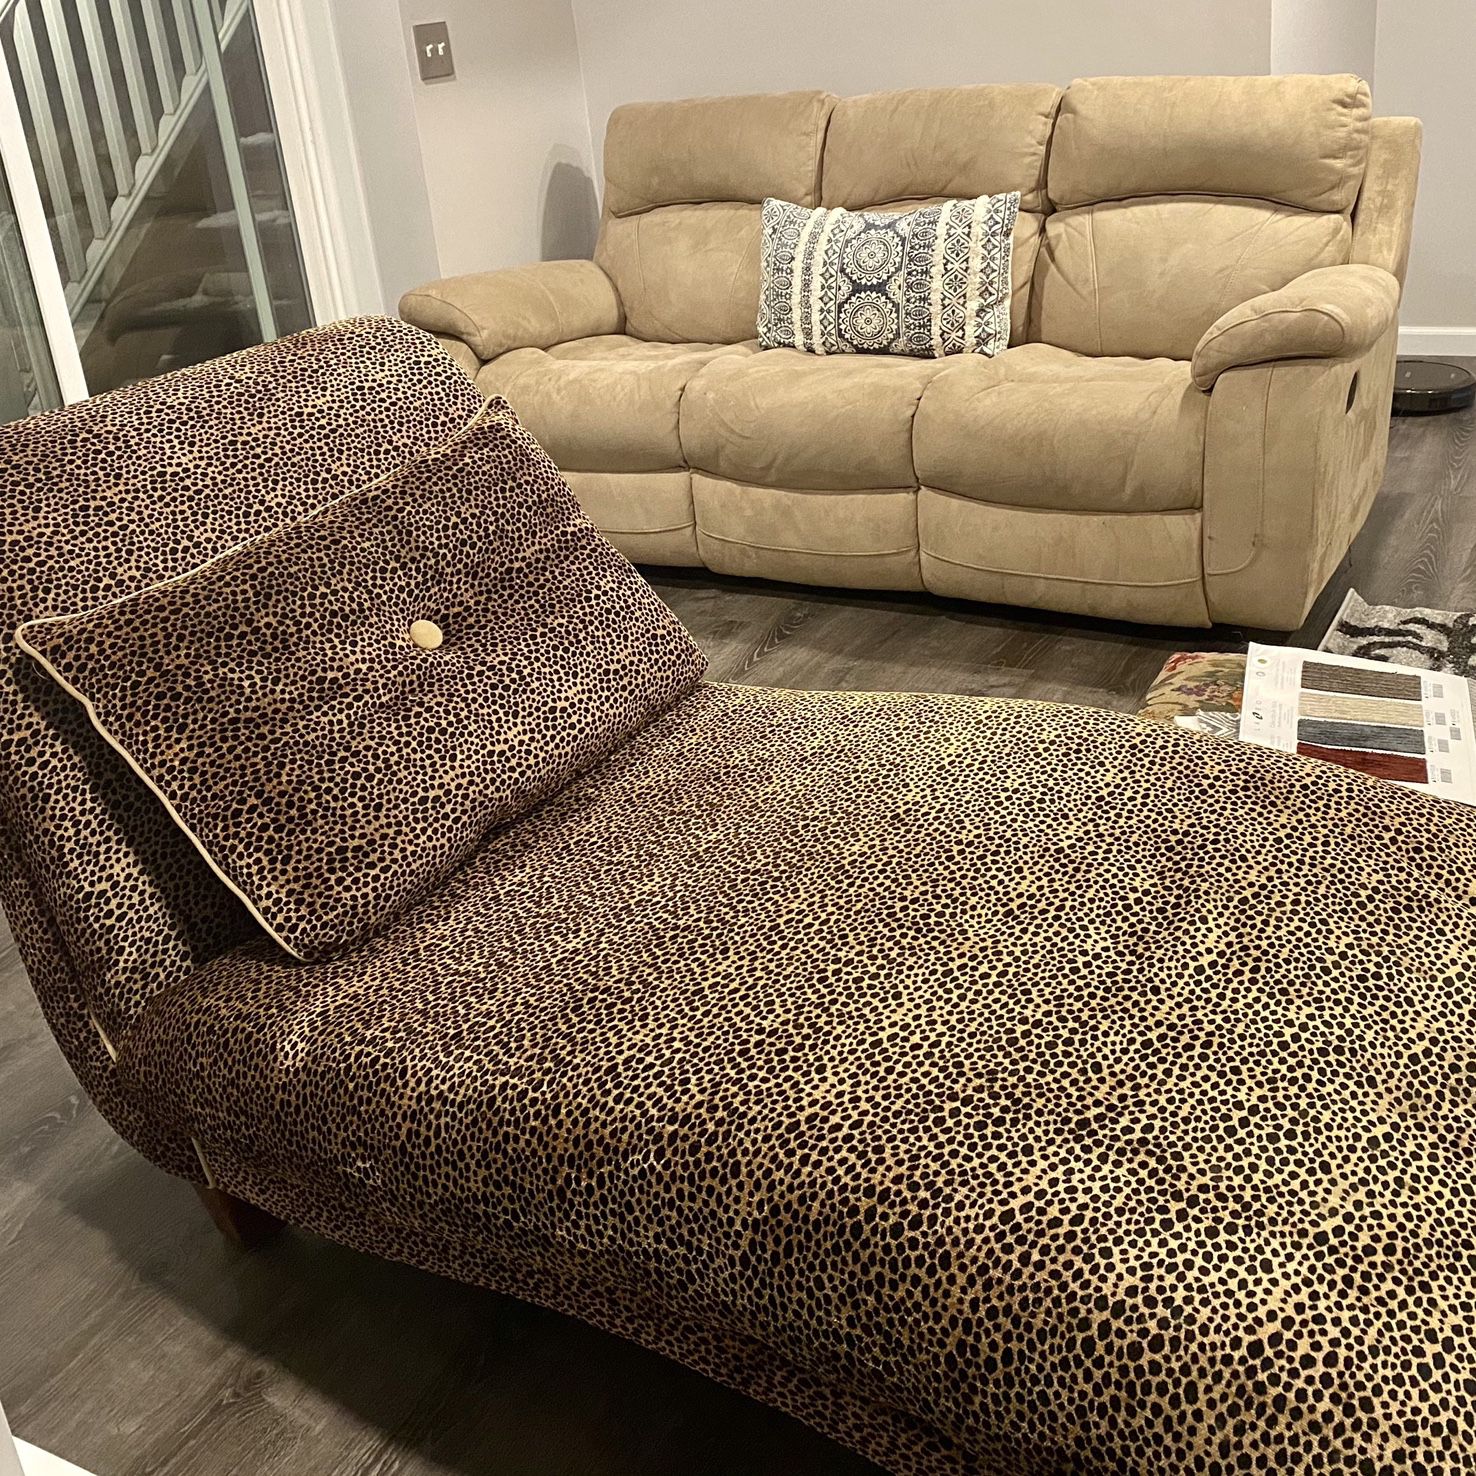 Recliner Couch & Leopard Print Fabric Chaise for Sale